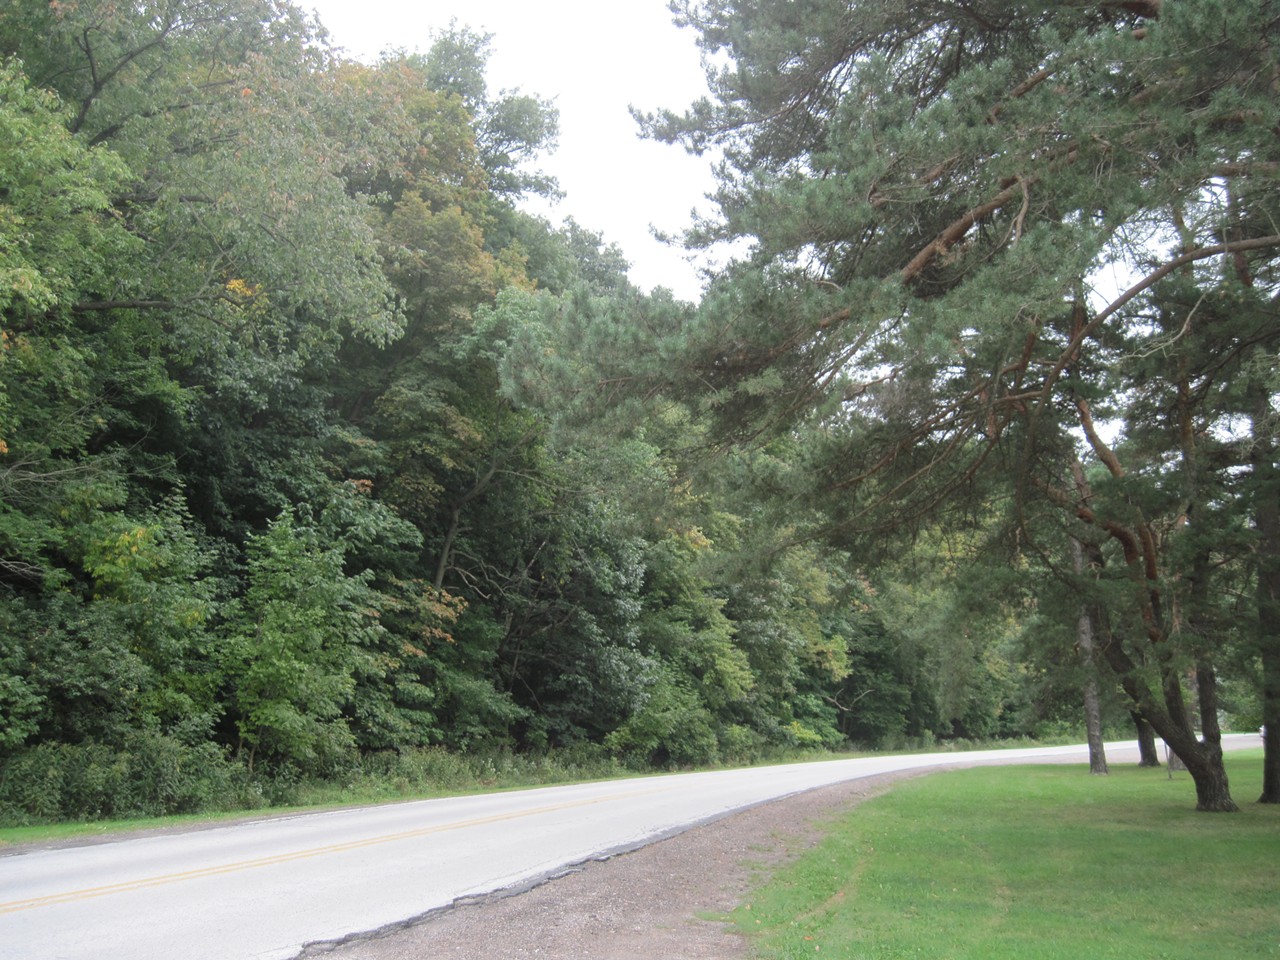 ...Where the trees are beautiful and the cyclists are plenty. Take a moment to park the car and hike deep into the forest. The Cleveland Metroparks system is among the region's most precious gems.